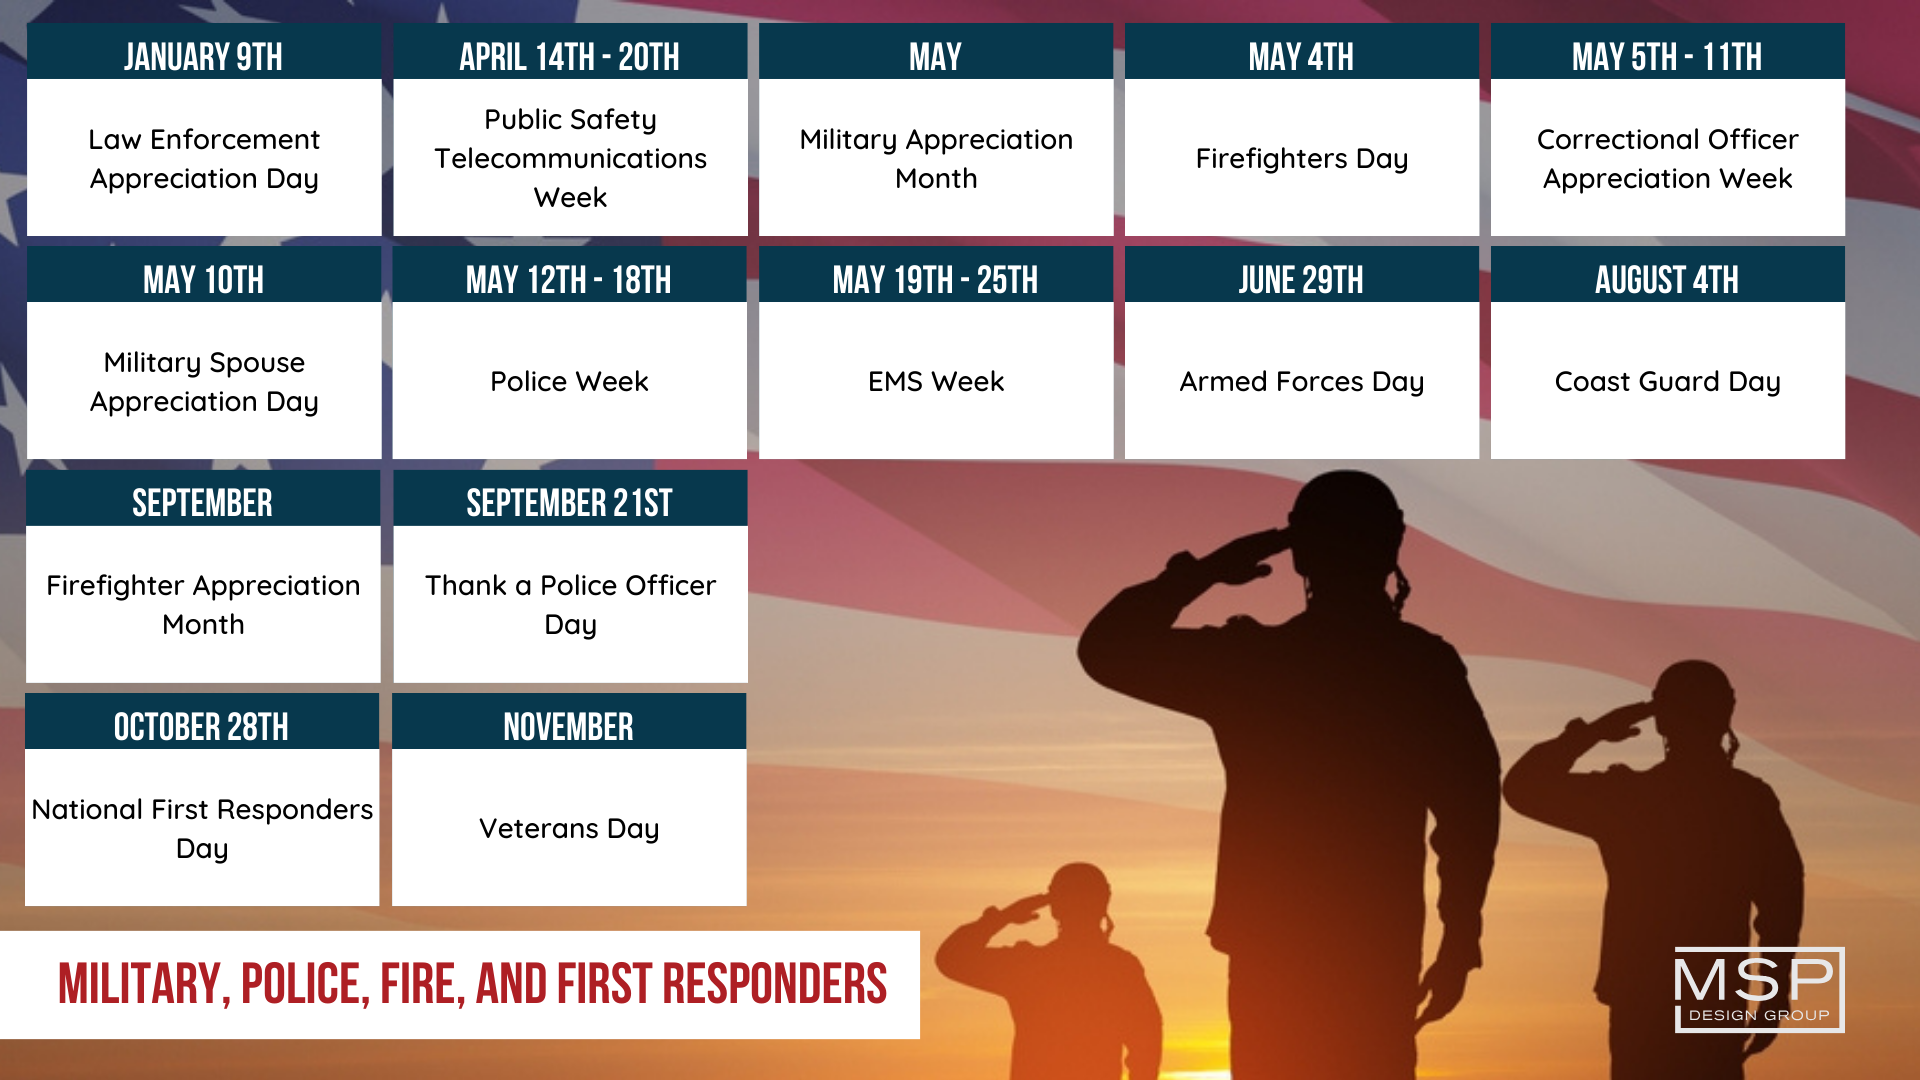 Employee Appreciation Calendar - Military, Police, Fire, and First Responders